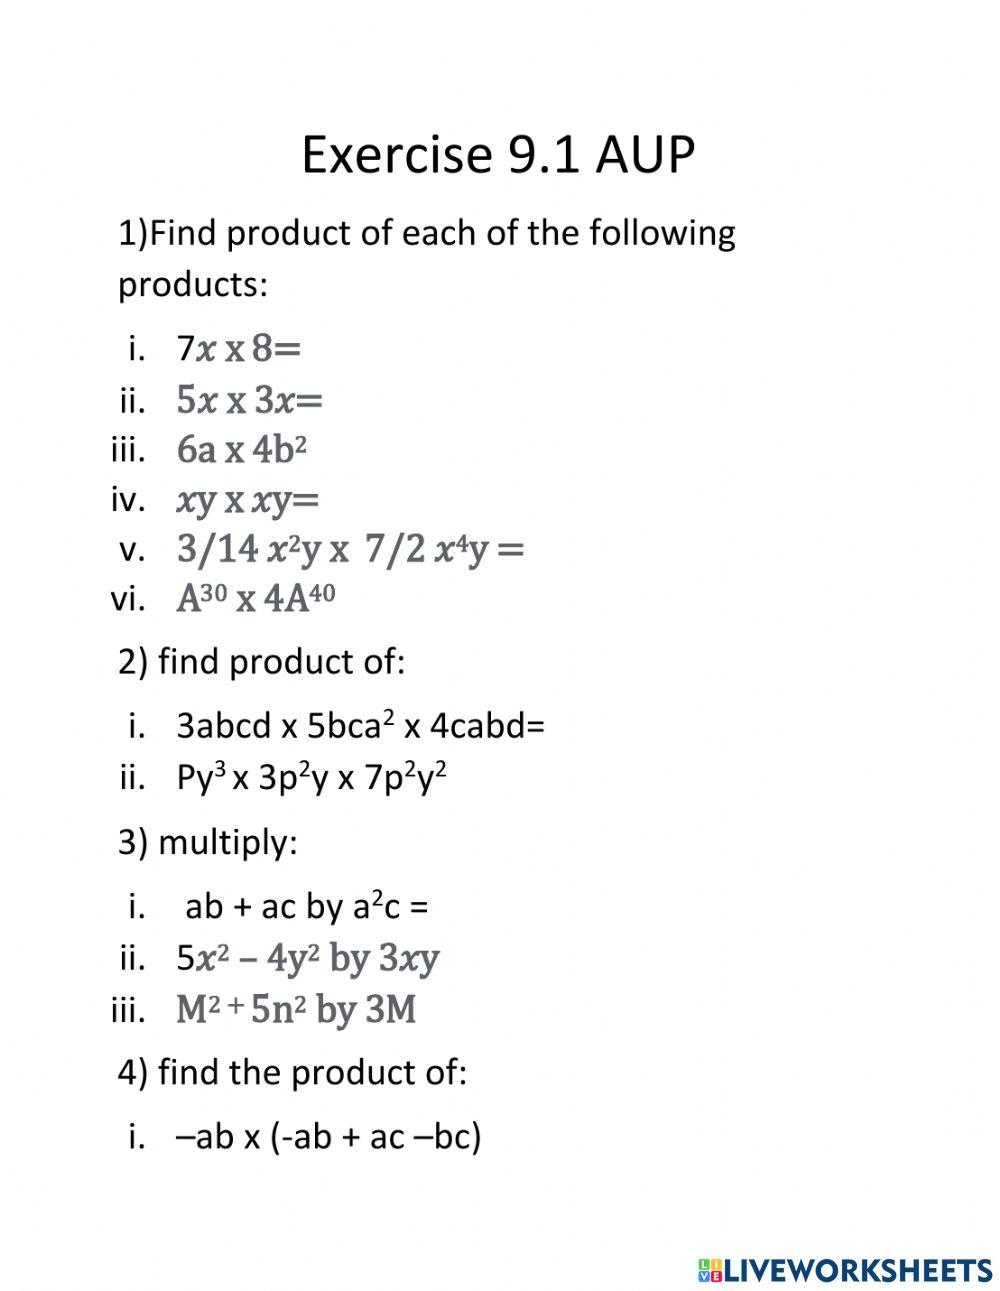 Exercise 9.1 AUP